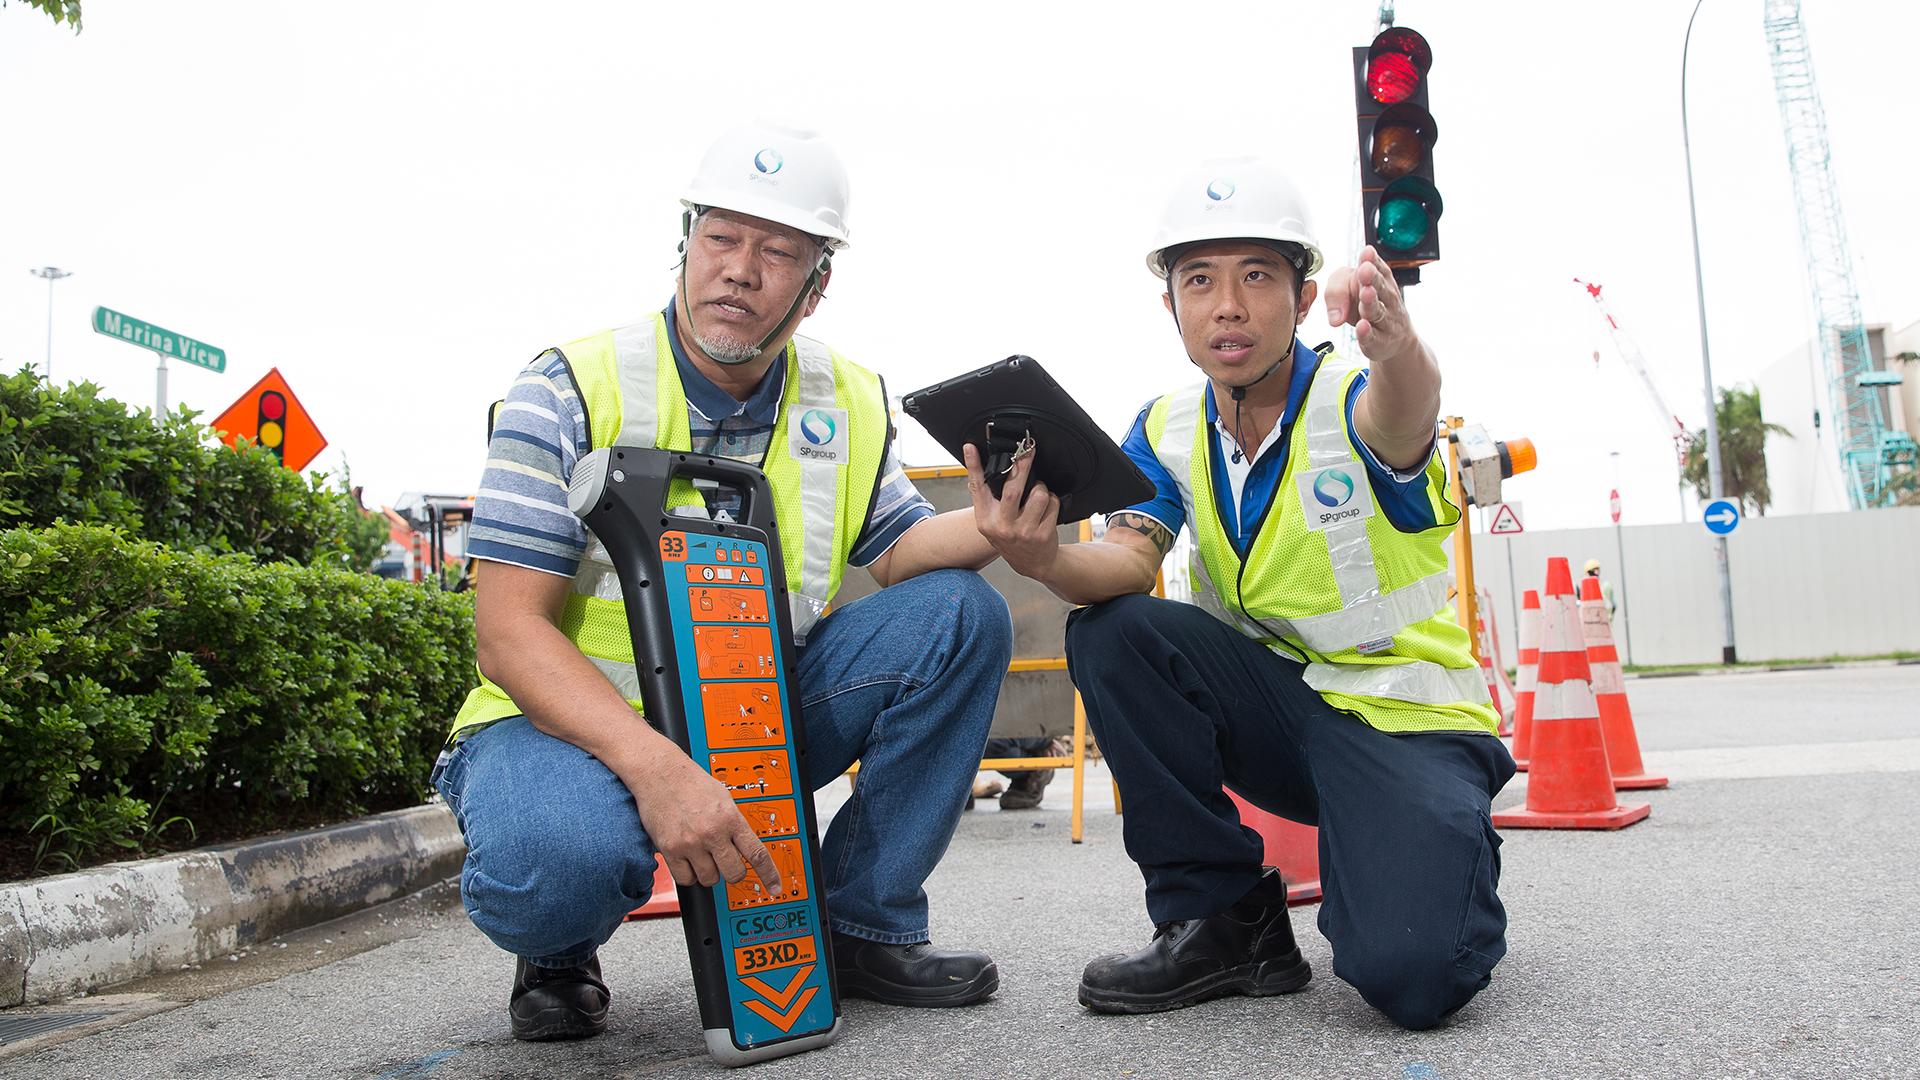 Detect and protect: Technical officer Mohamed Saiful Matsaid (left) uses a cable locator to detect electricity cables hidden underground as Principal Engineer James Ou (right) marks out the path of the cable.